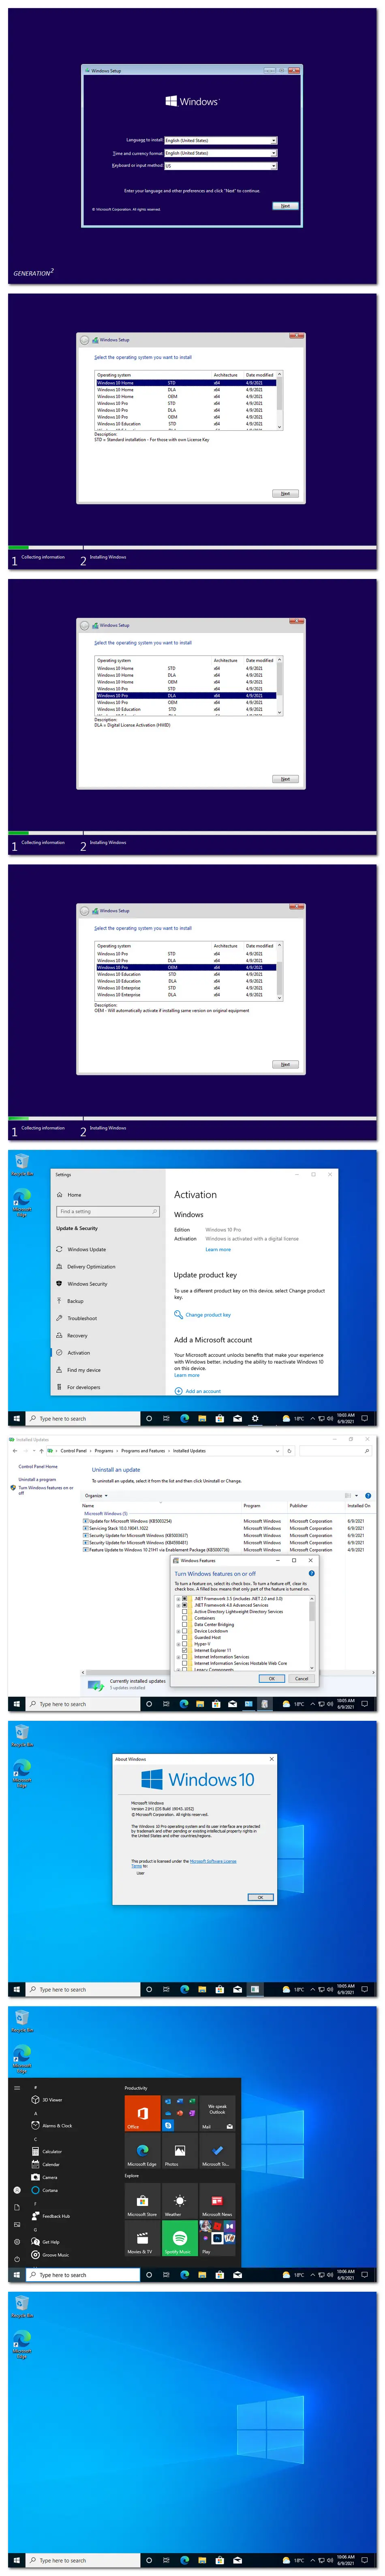 windows 10 preactivated highly compressed